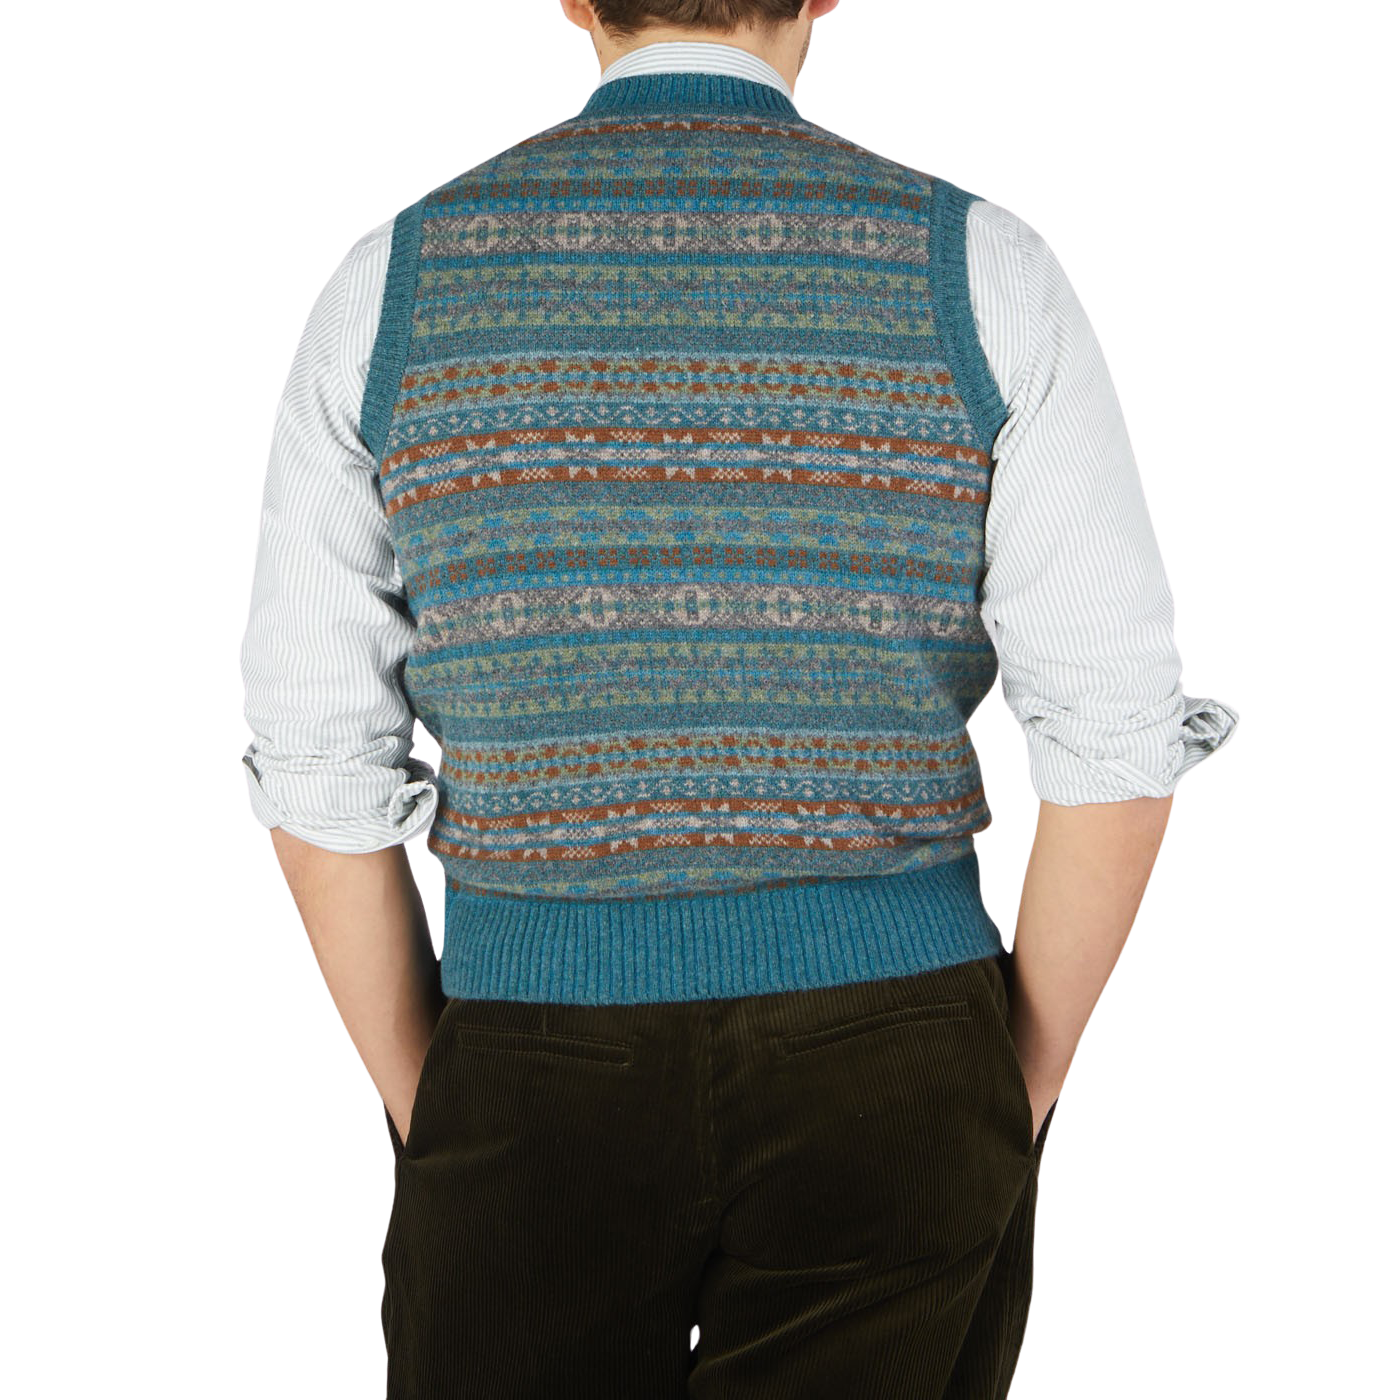 The back view of a man wearing a William Lockie Hunter Blue Fair Isle V-Neck Lambswool Slipover made of Scottish lambswool.